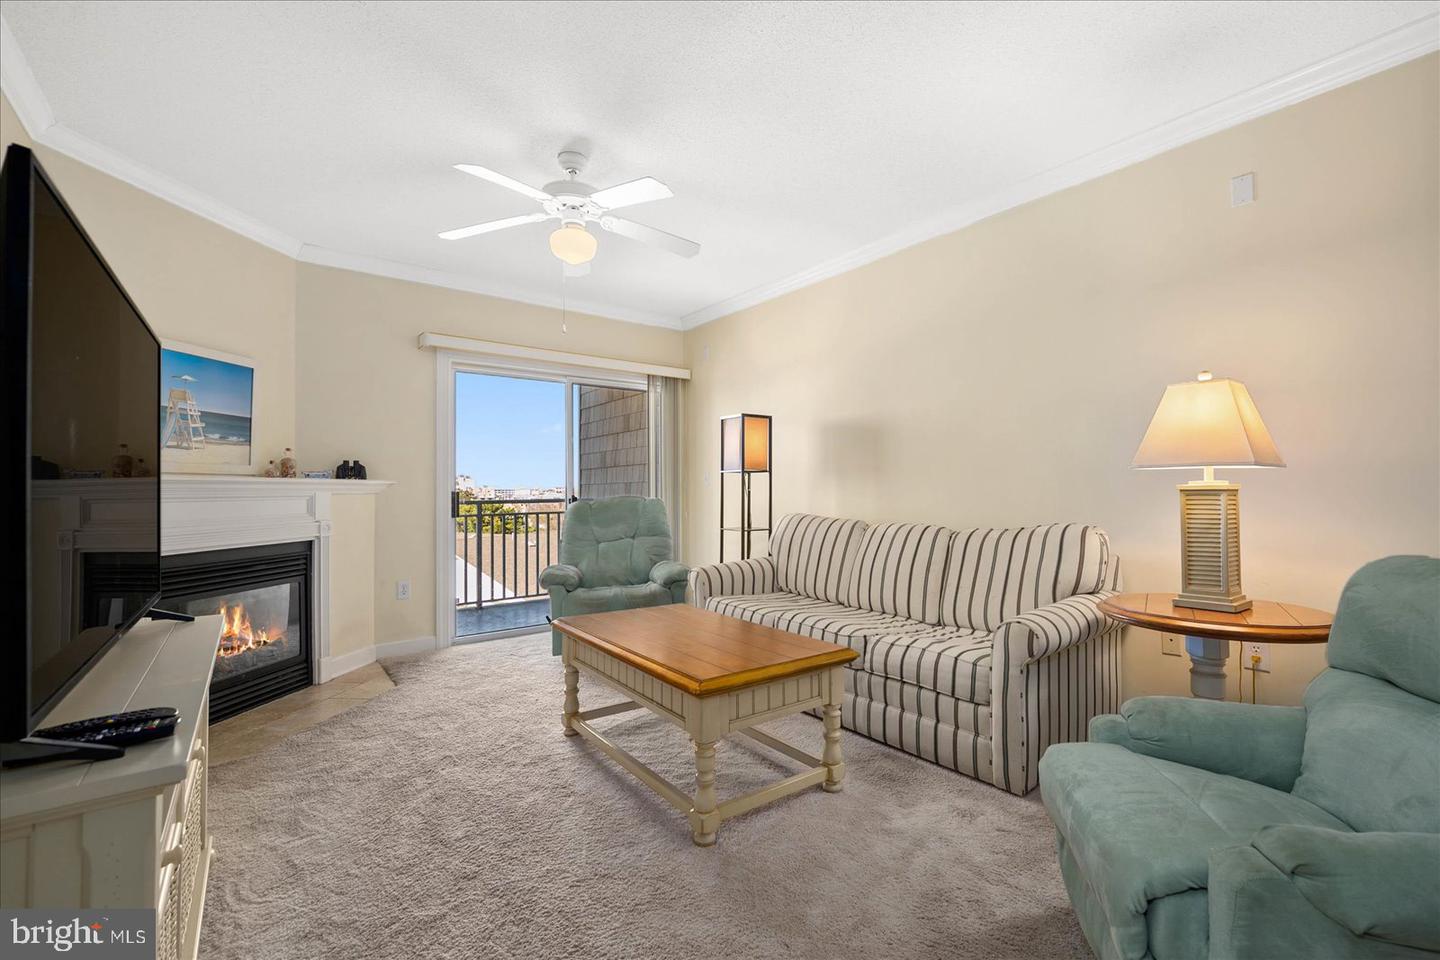 MDWO2019672-802922313110-2024-03-15-14-18-06 300 17th St #303 | Ocean City, MD Real Estate For Sale | MLS# Mdwo2019672  - 1st Choice Properties